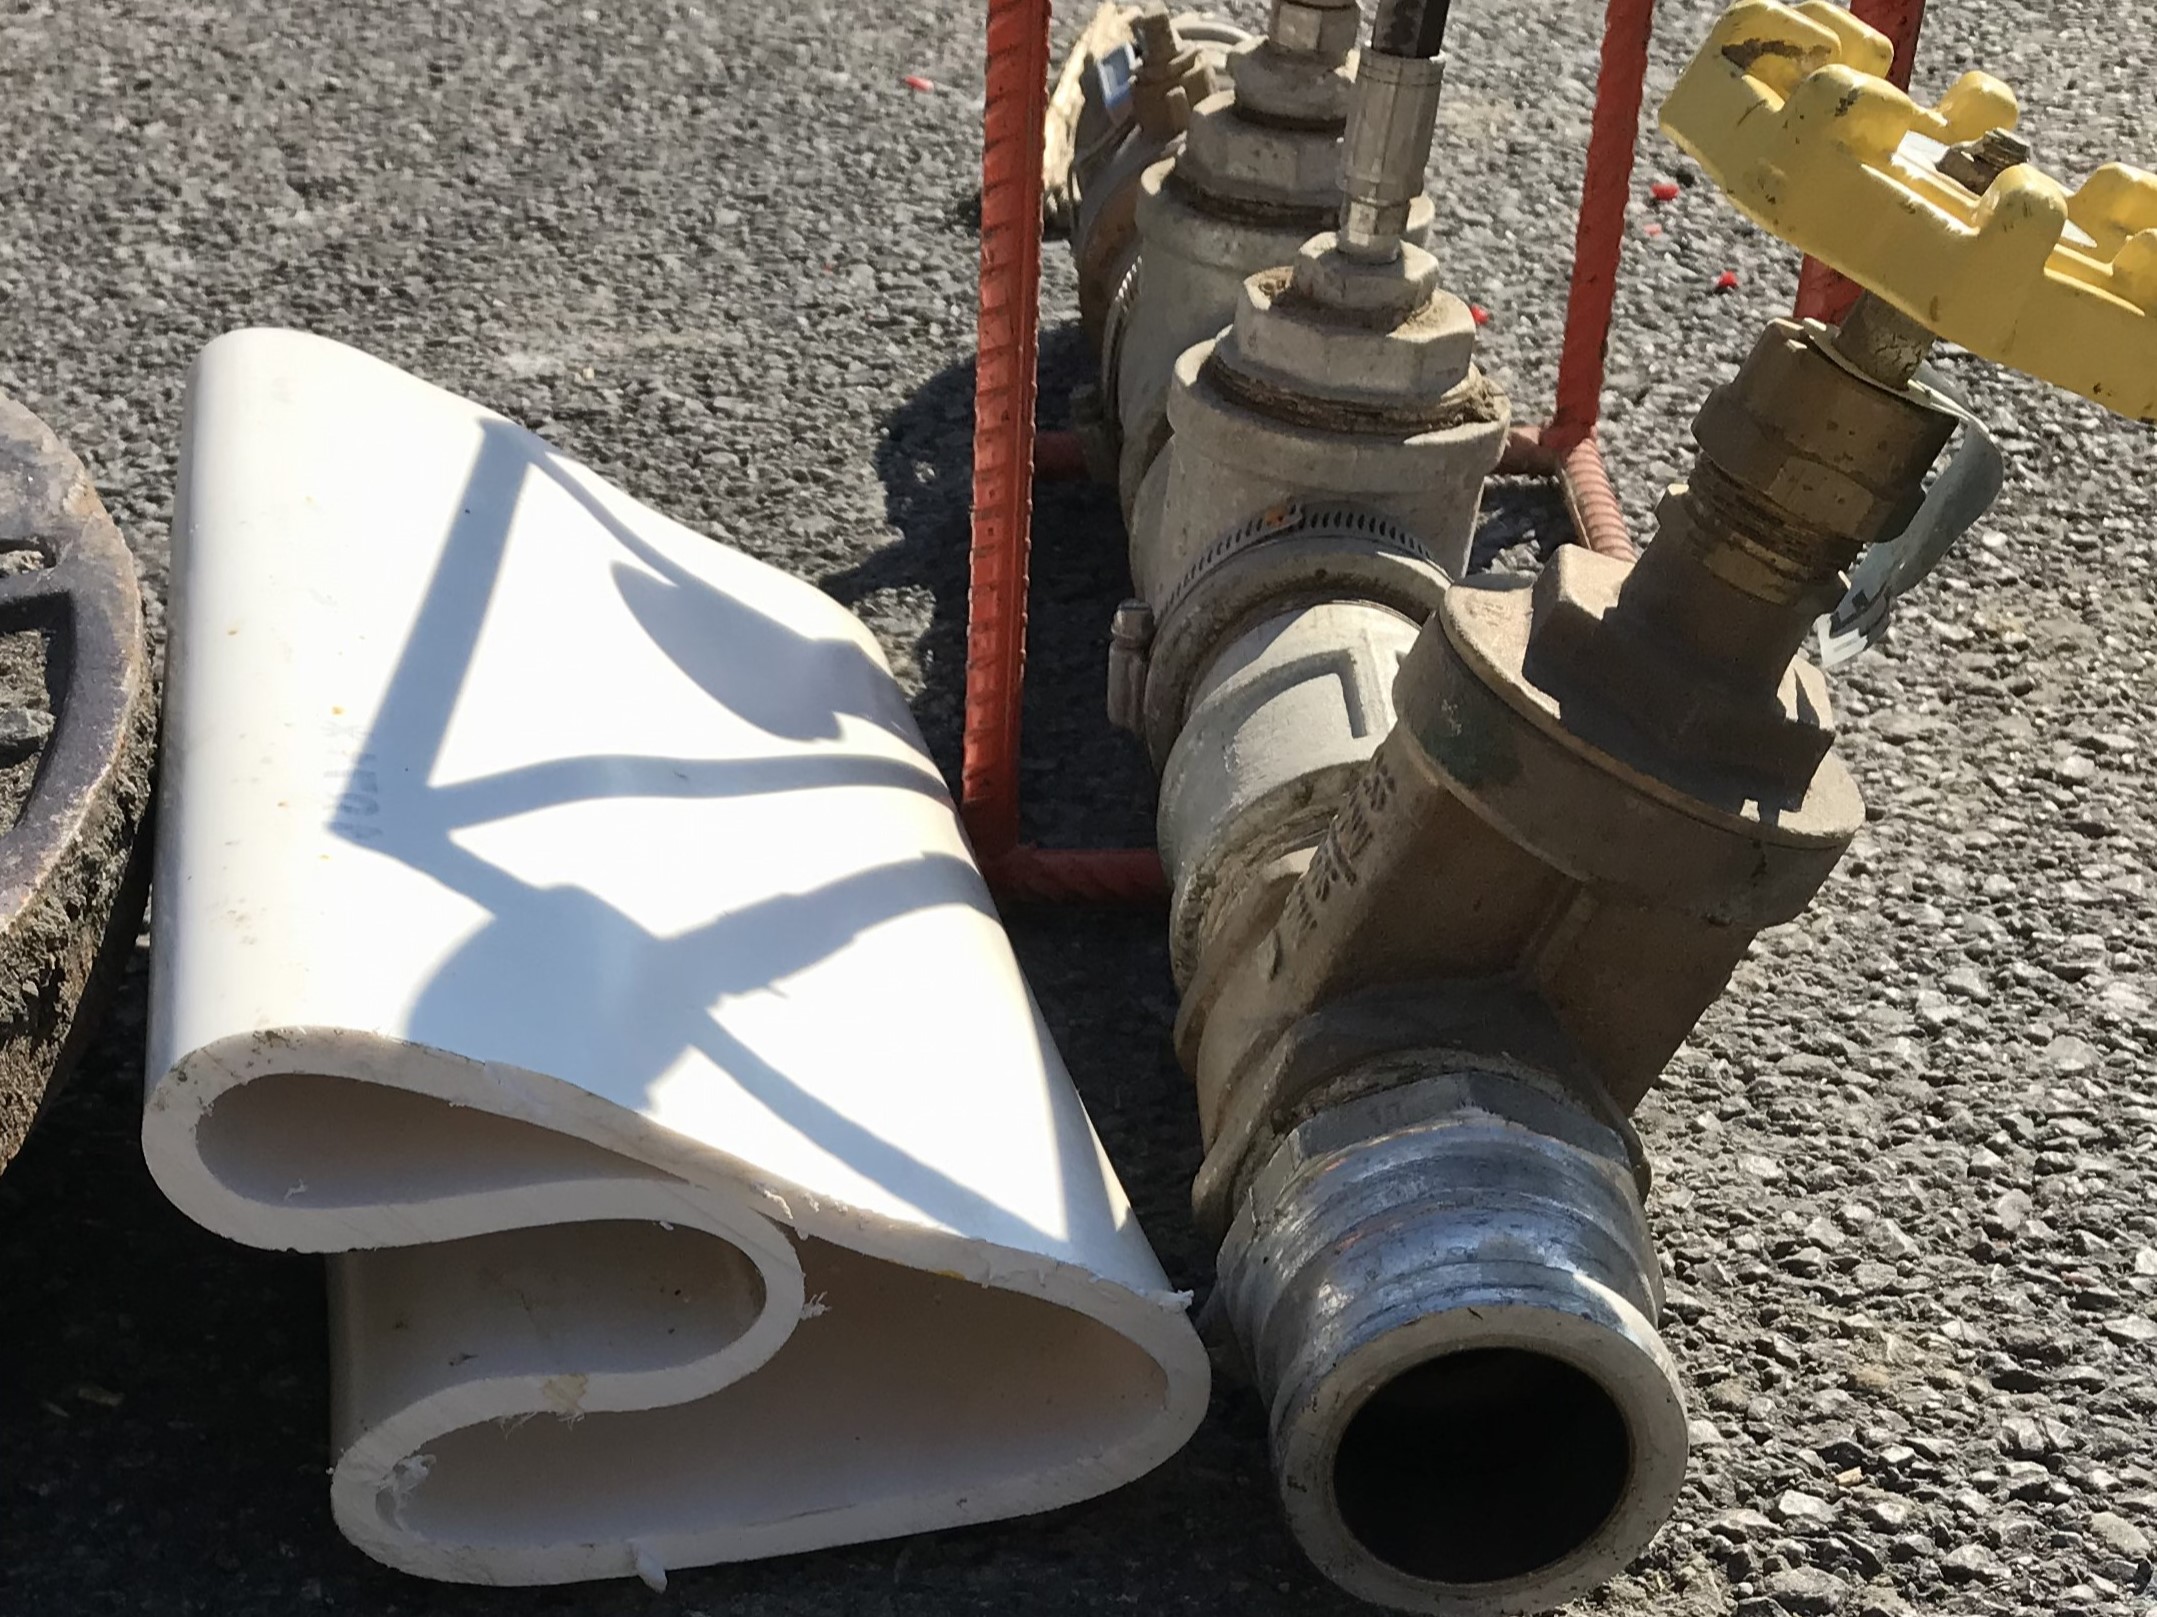 An image of a piece of the special white PVC liner lying on the ground next to a steam valve with a yellow knob on top